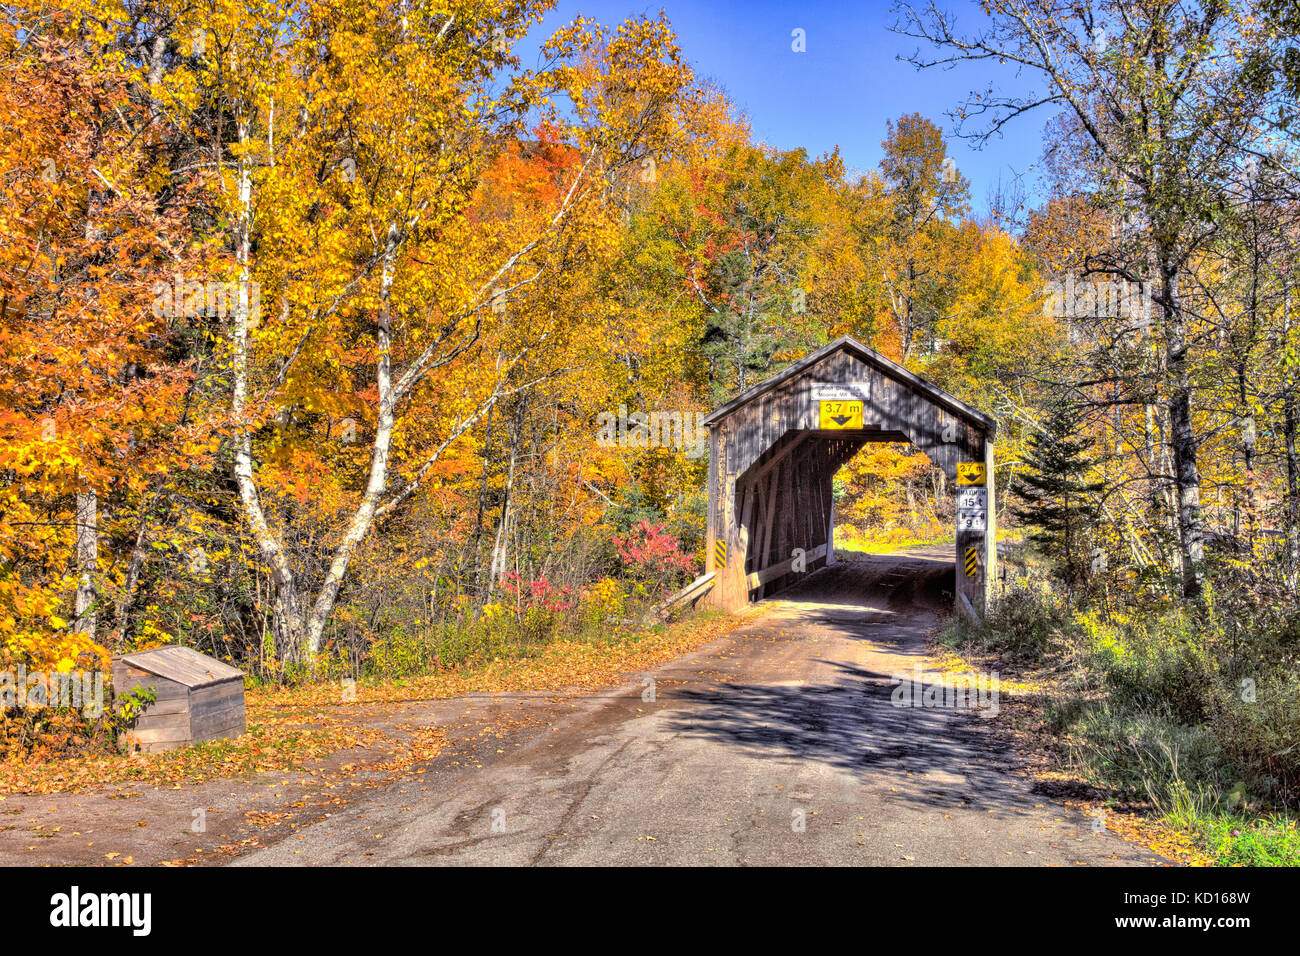 Trout Creek # 5 pont couvert, moores mill, Waterford, New Brunswick, canada Banque D'Images